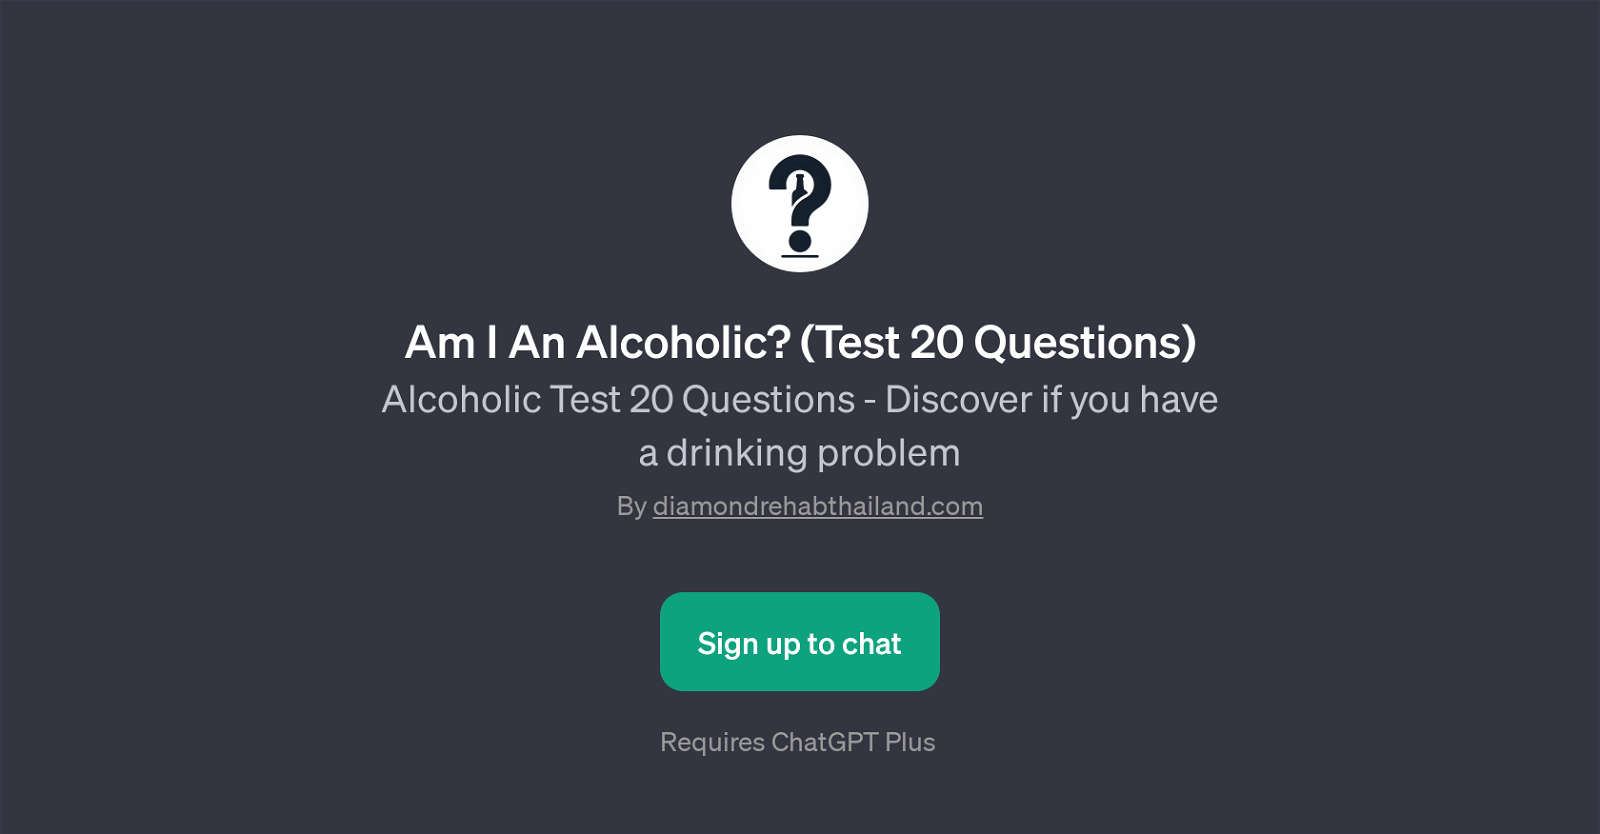 Am I An Alcoholic? (Test 20 Questions) website